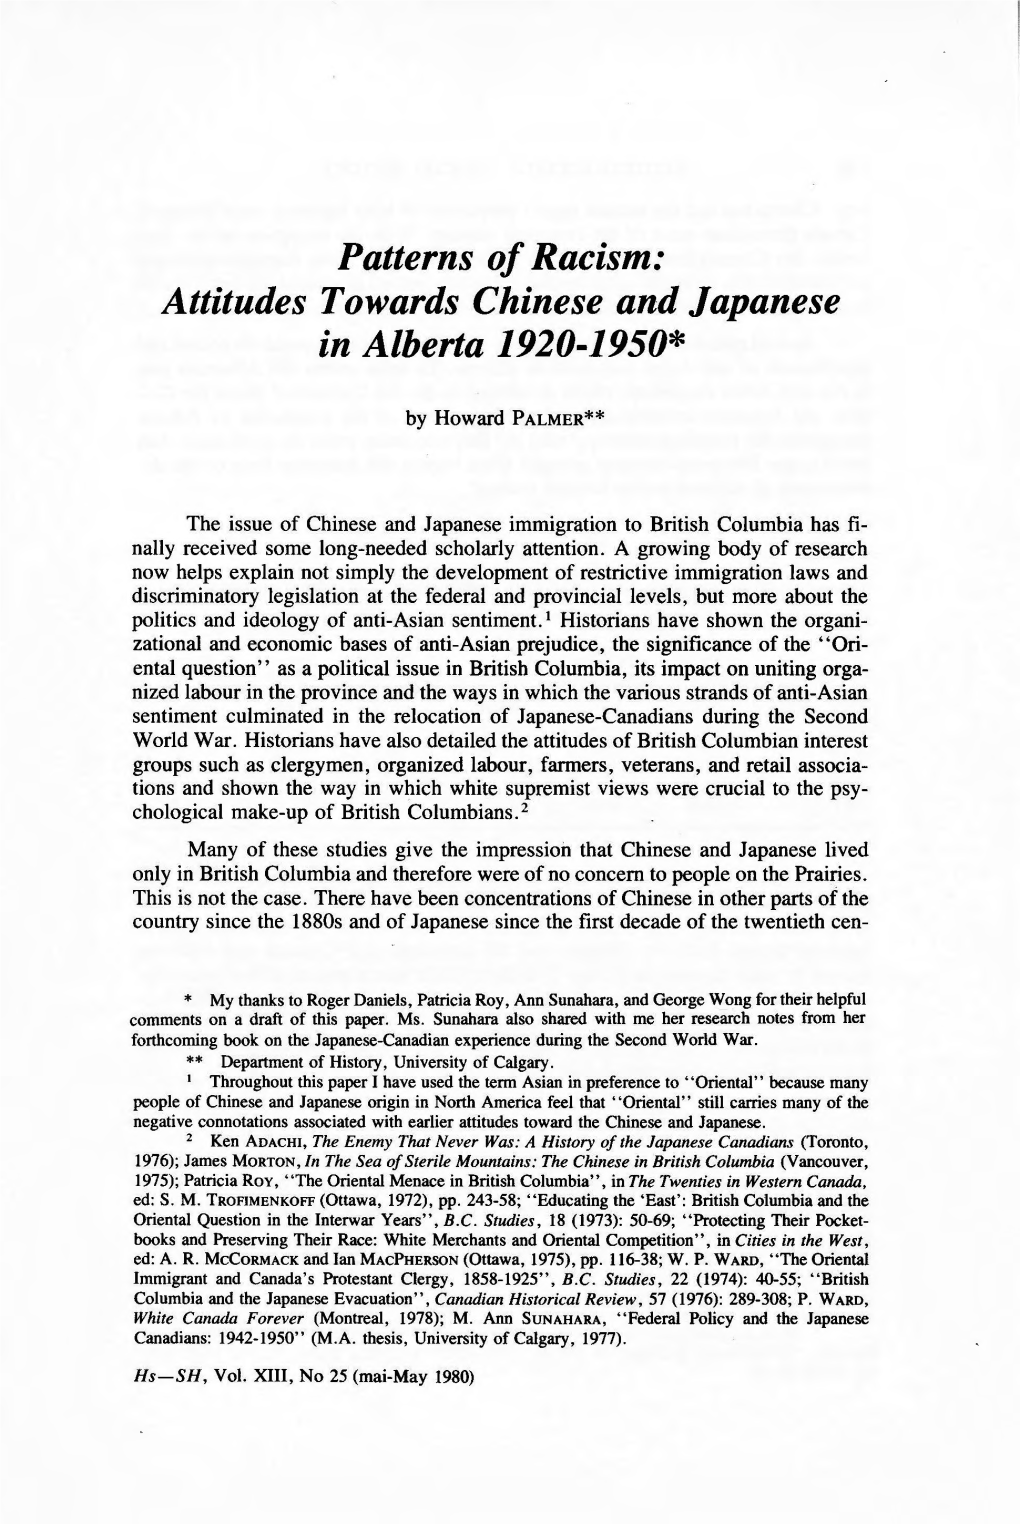 Patterns of Racism: Attitudes Towards Chinese and Japanese in Alberta 1920-1950*